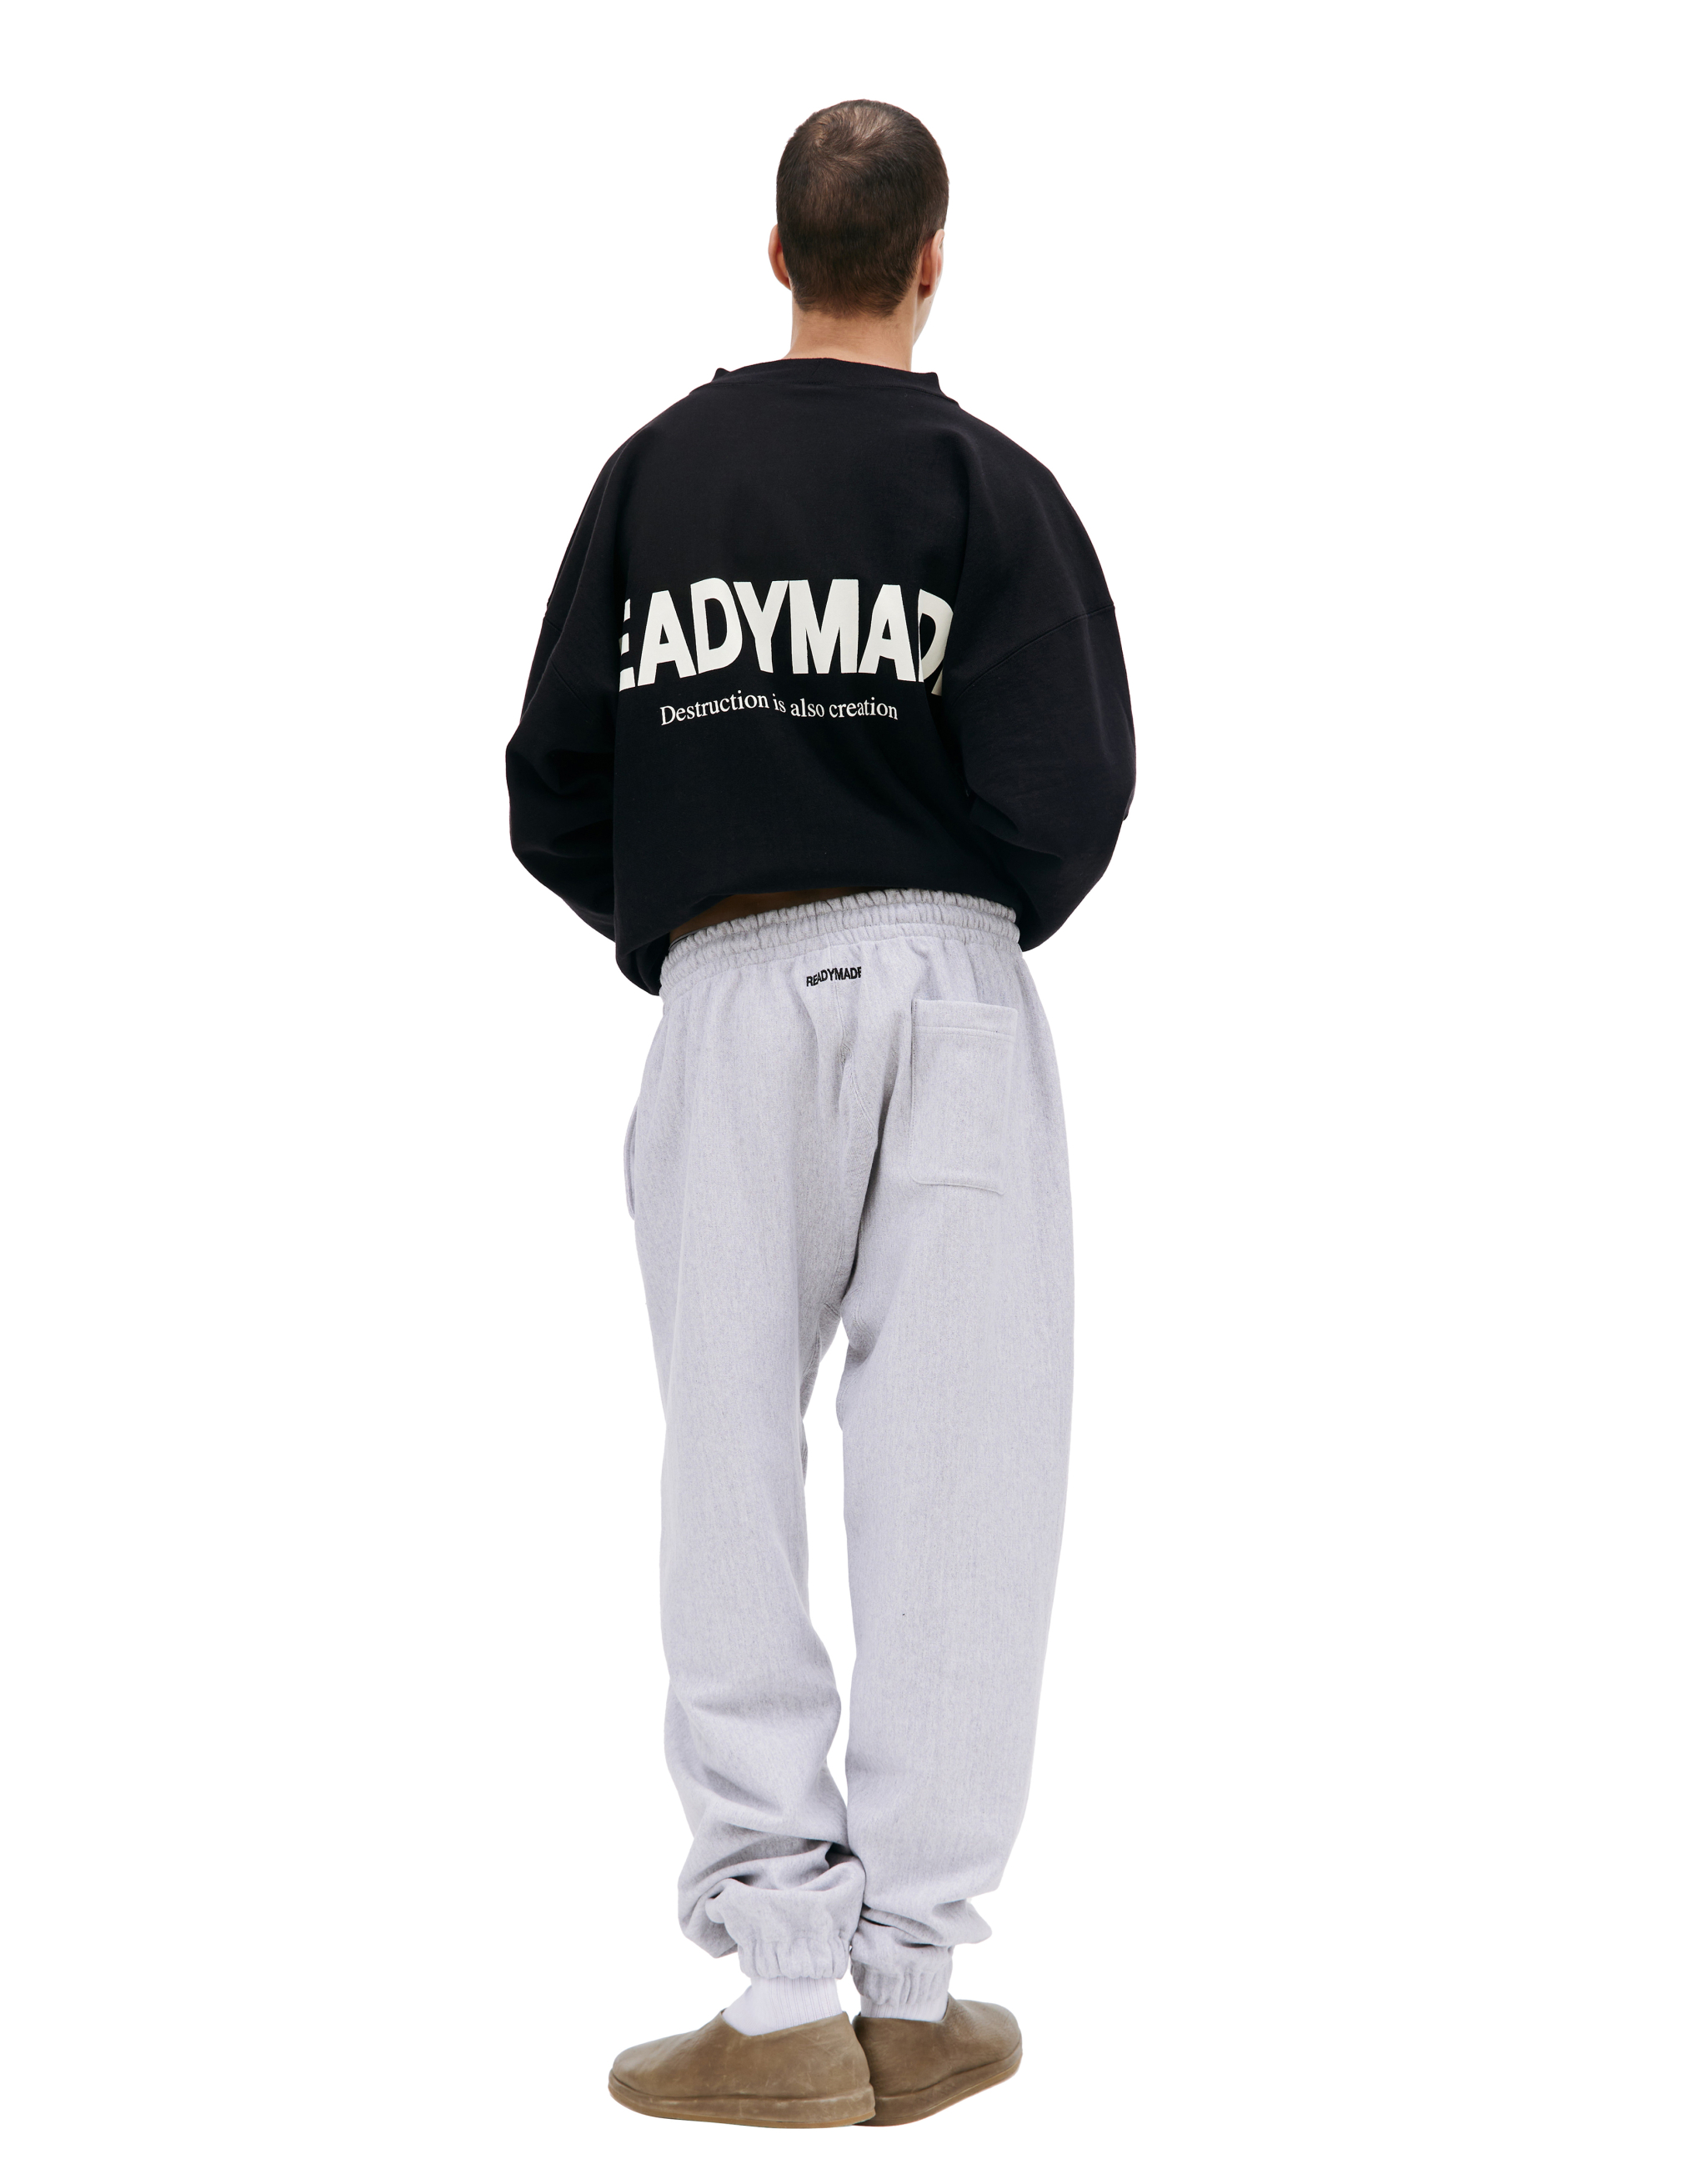 Shop Readymade Gray Cotton Sweat Pants In Grey